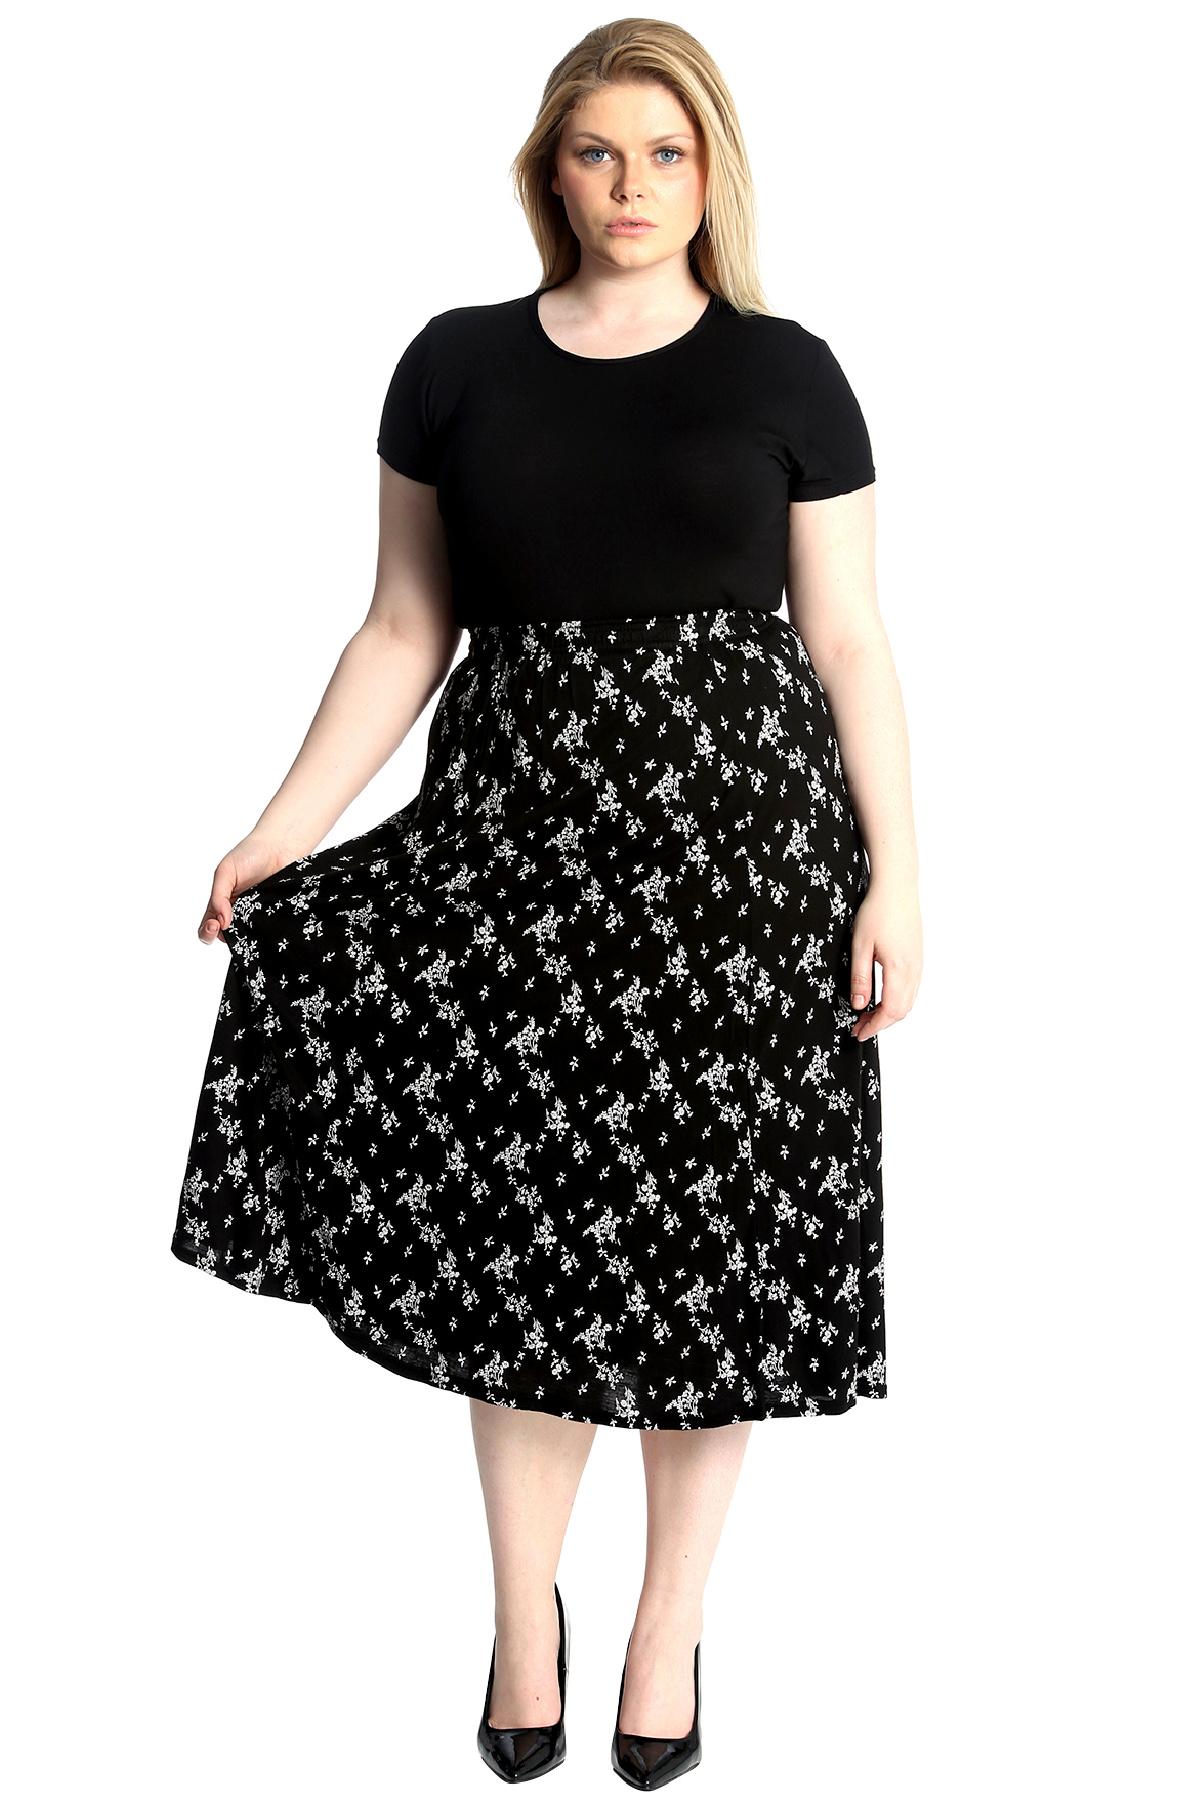 New Ladies Skirt Womens A-Line Maxi Style Plus Size Long Elasticated ...